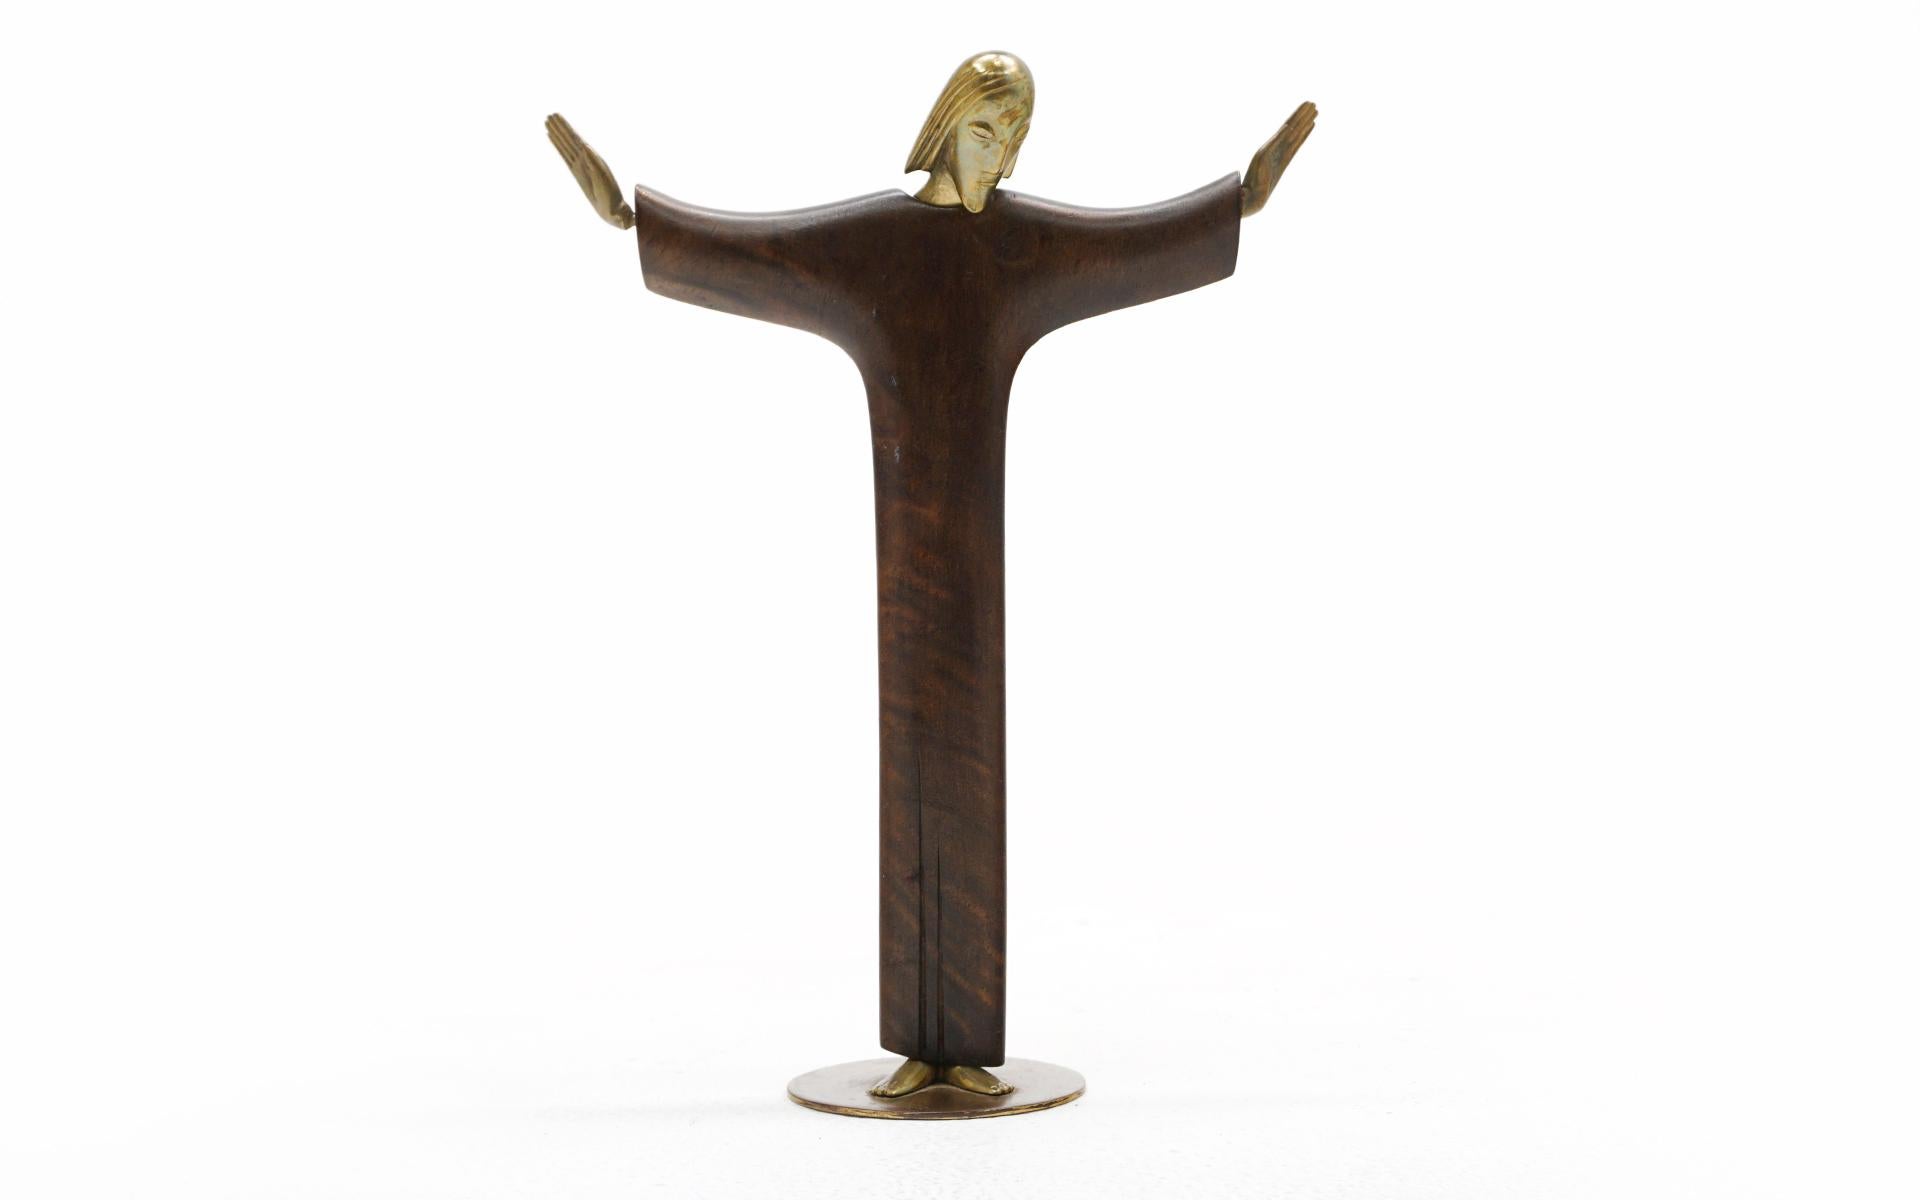 Rare Untitled (Jesus Christ) table top sculpture by Karl Hagenauer for Werkstätte Hagenauer, Austria, c. 1950
Brazilian rosewood body and bronze head and hands. One hand turns in place. Condition is very good with very few signs of handling.